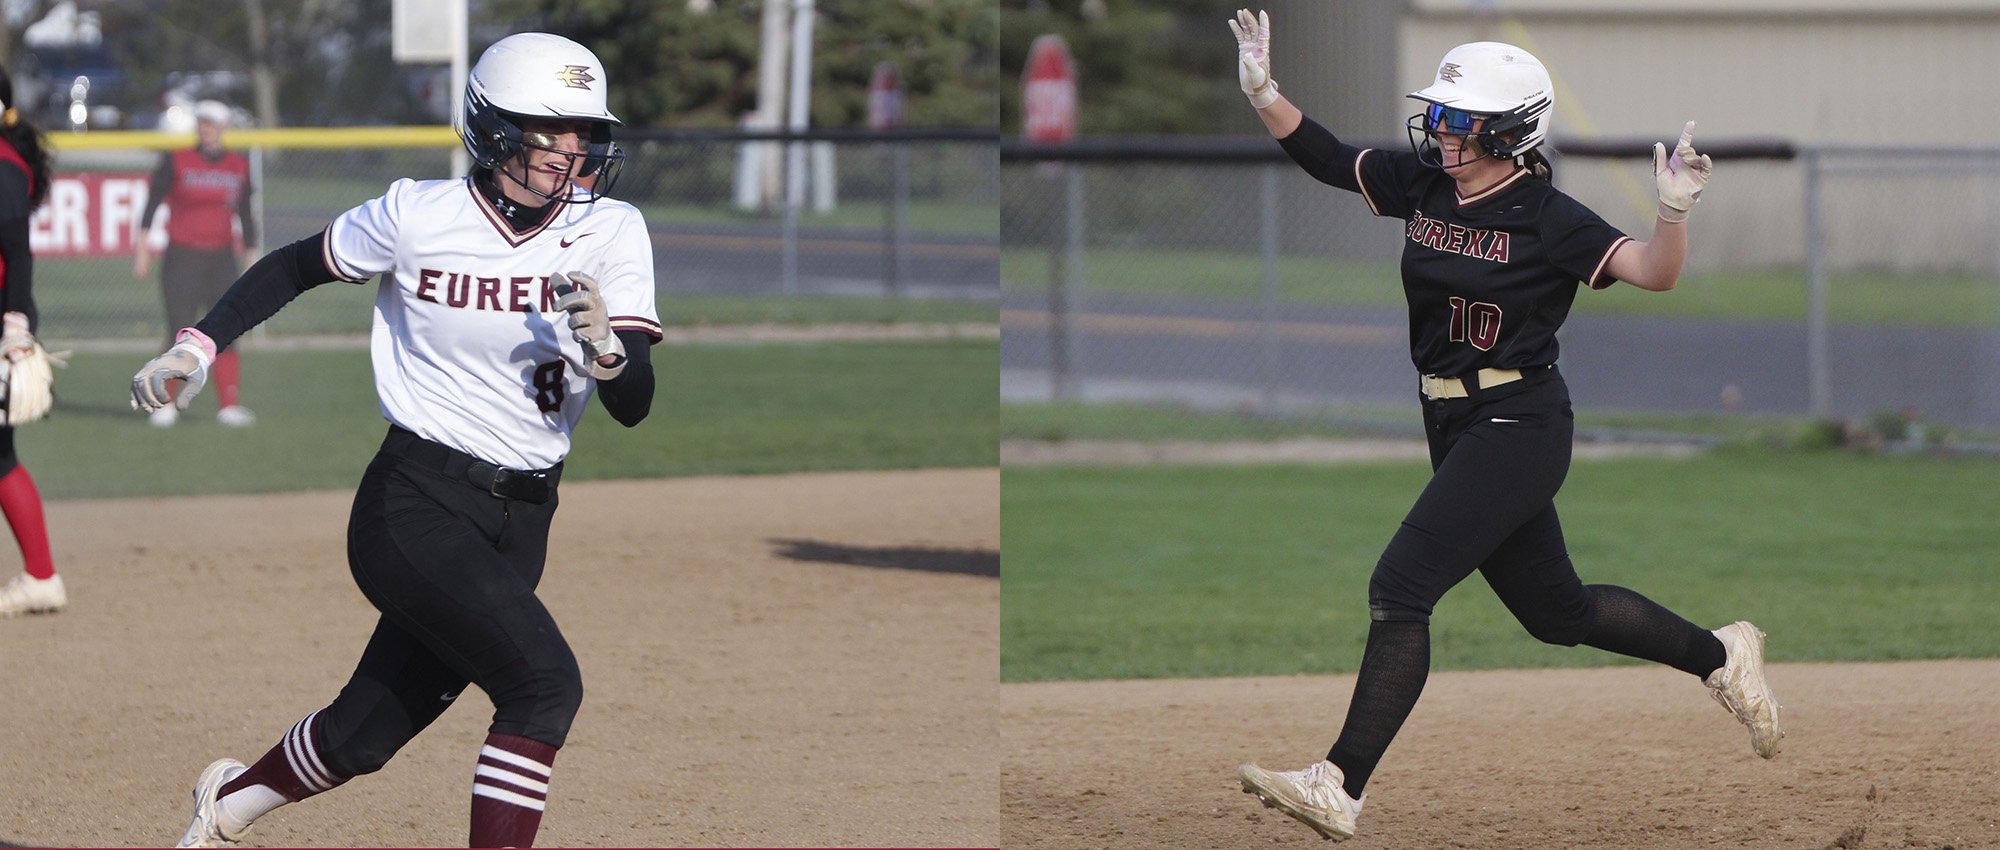 Raelyn Payne Named SLIAC Softball Player of the Year; Kate LeMasters selected Second Team